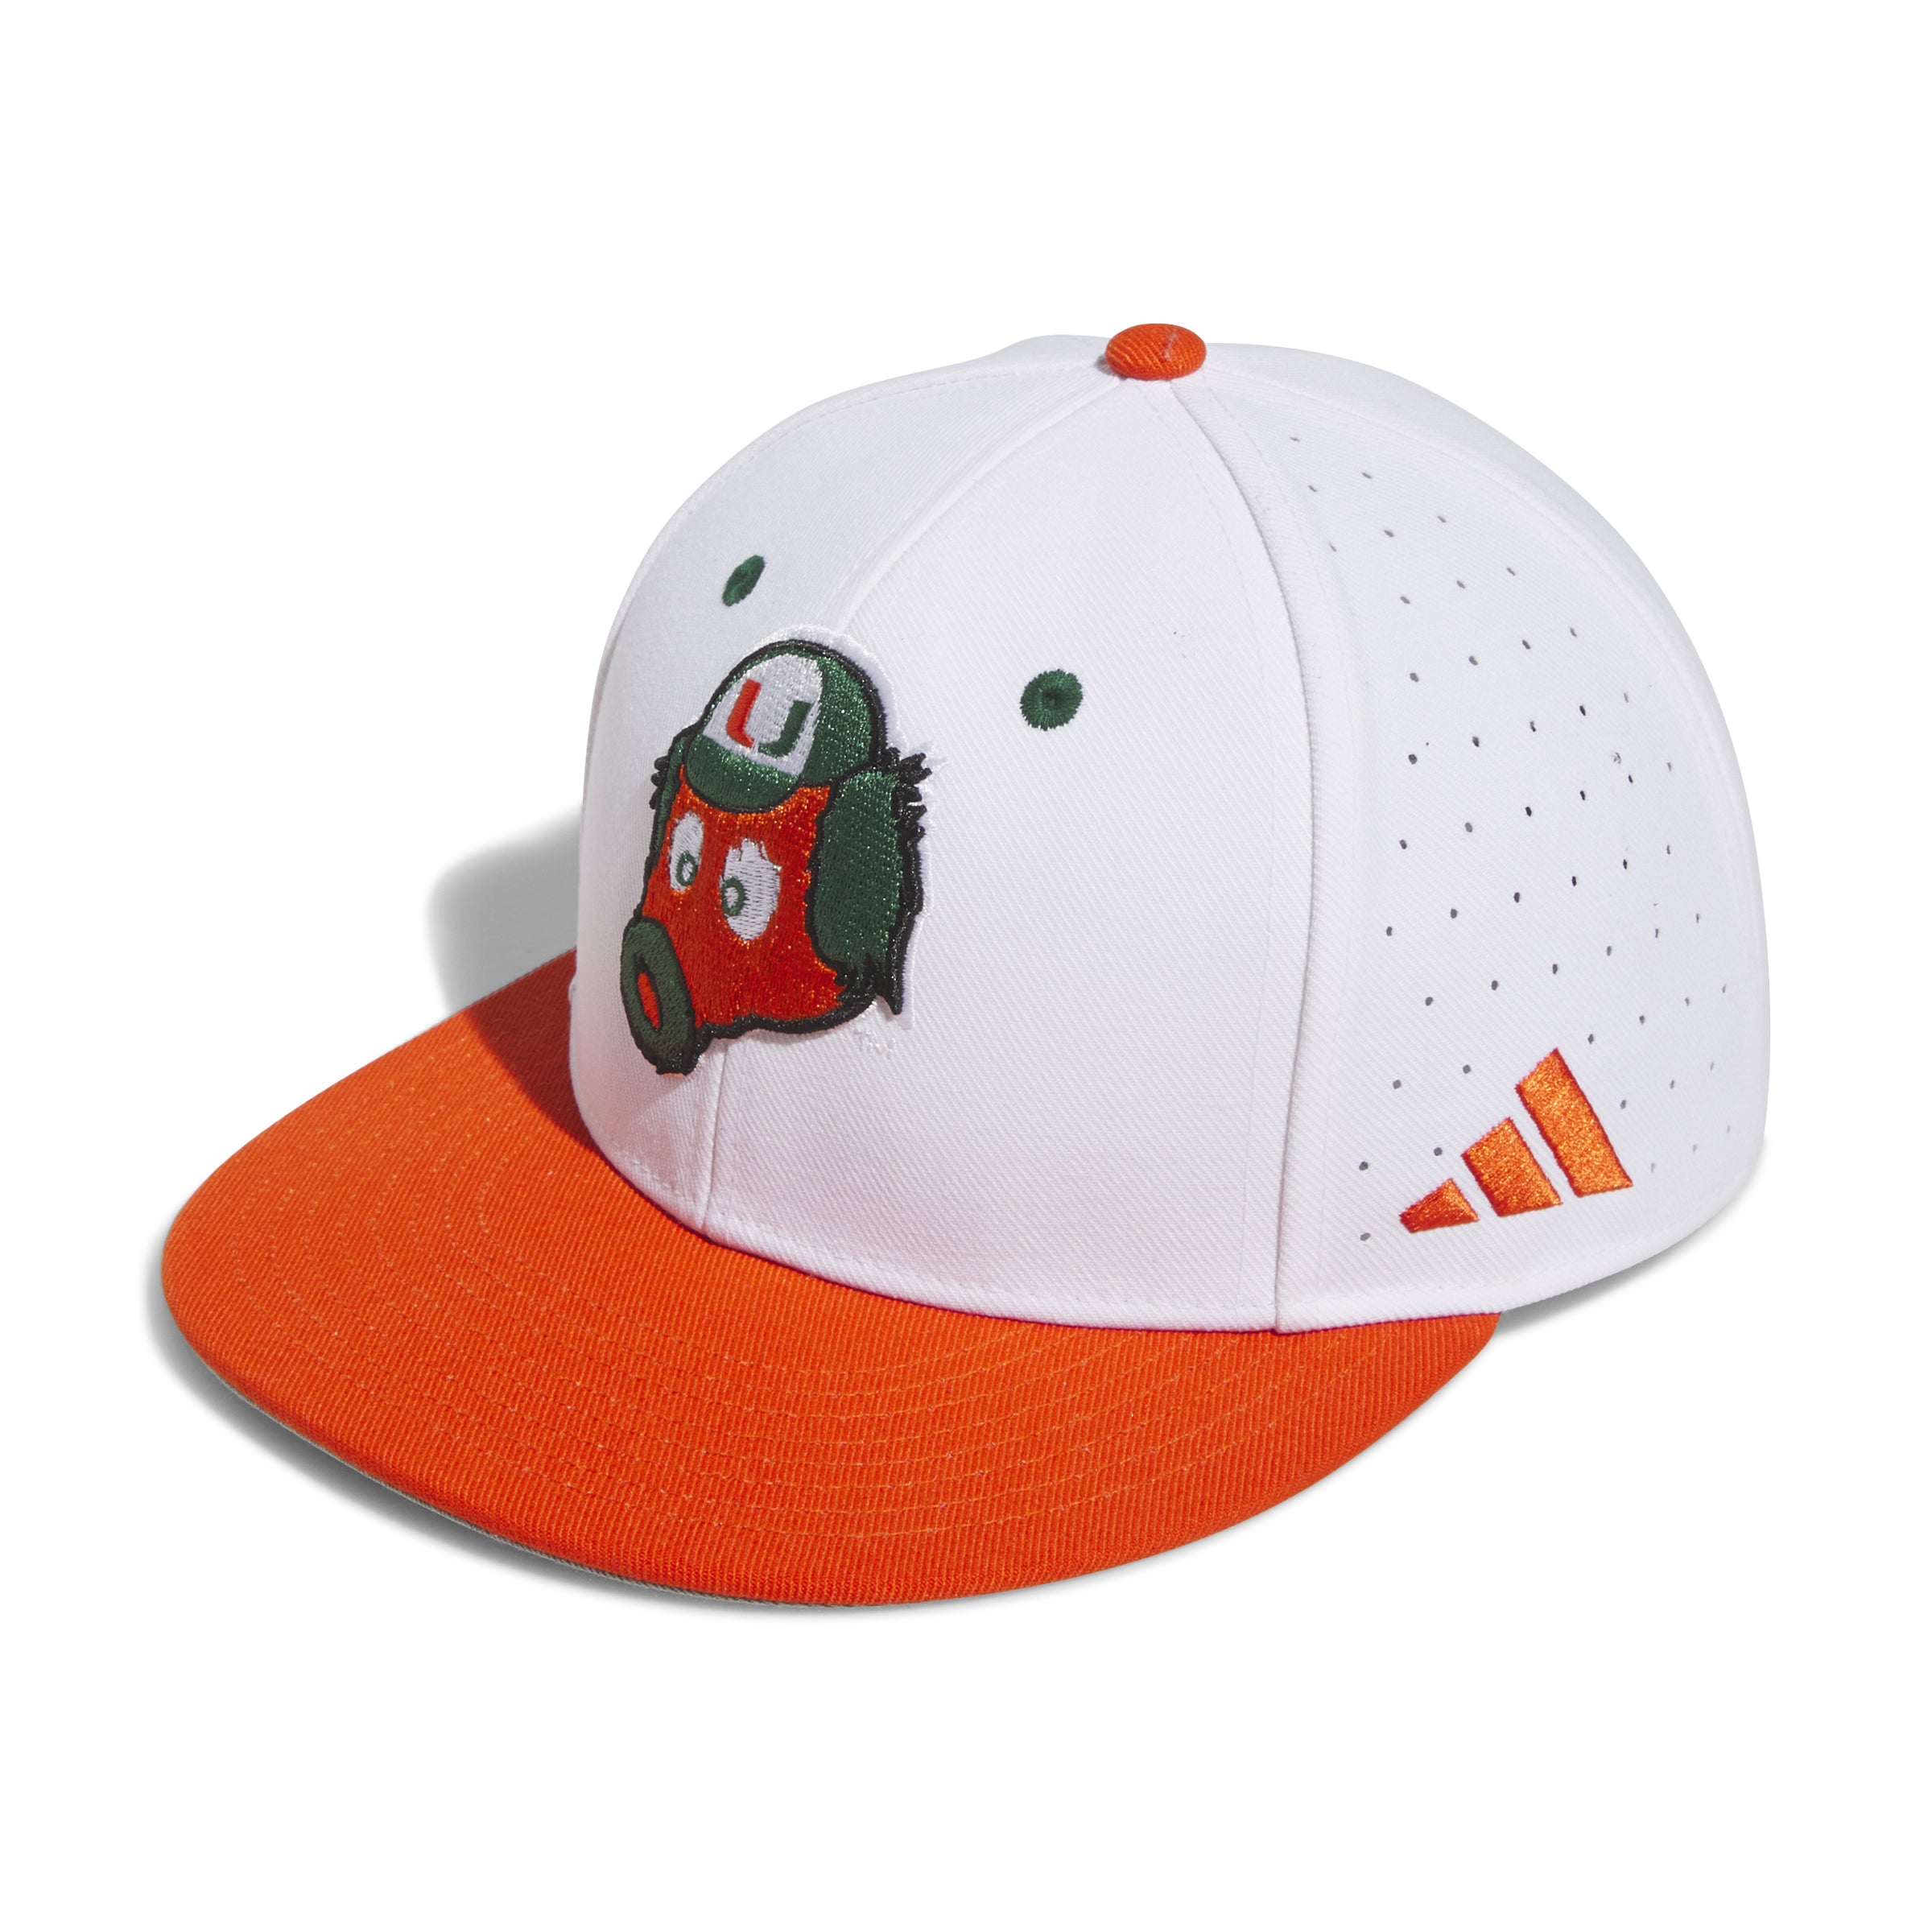 Miami Hurricanes Adidas On Field Maniac Perforated Fitted Baseball Hat - White 7